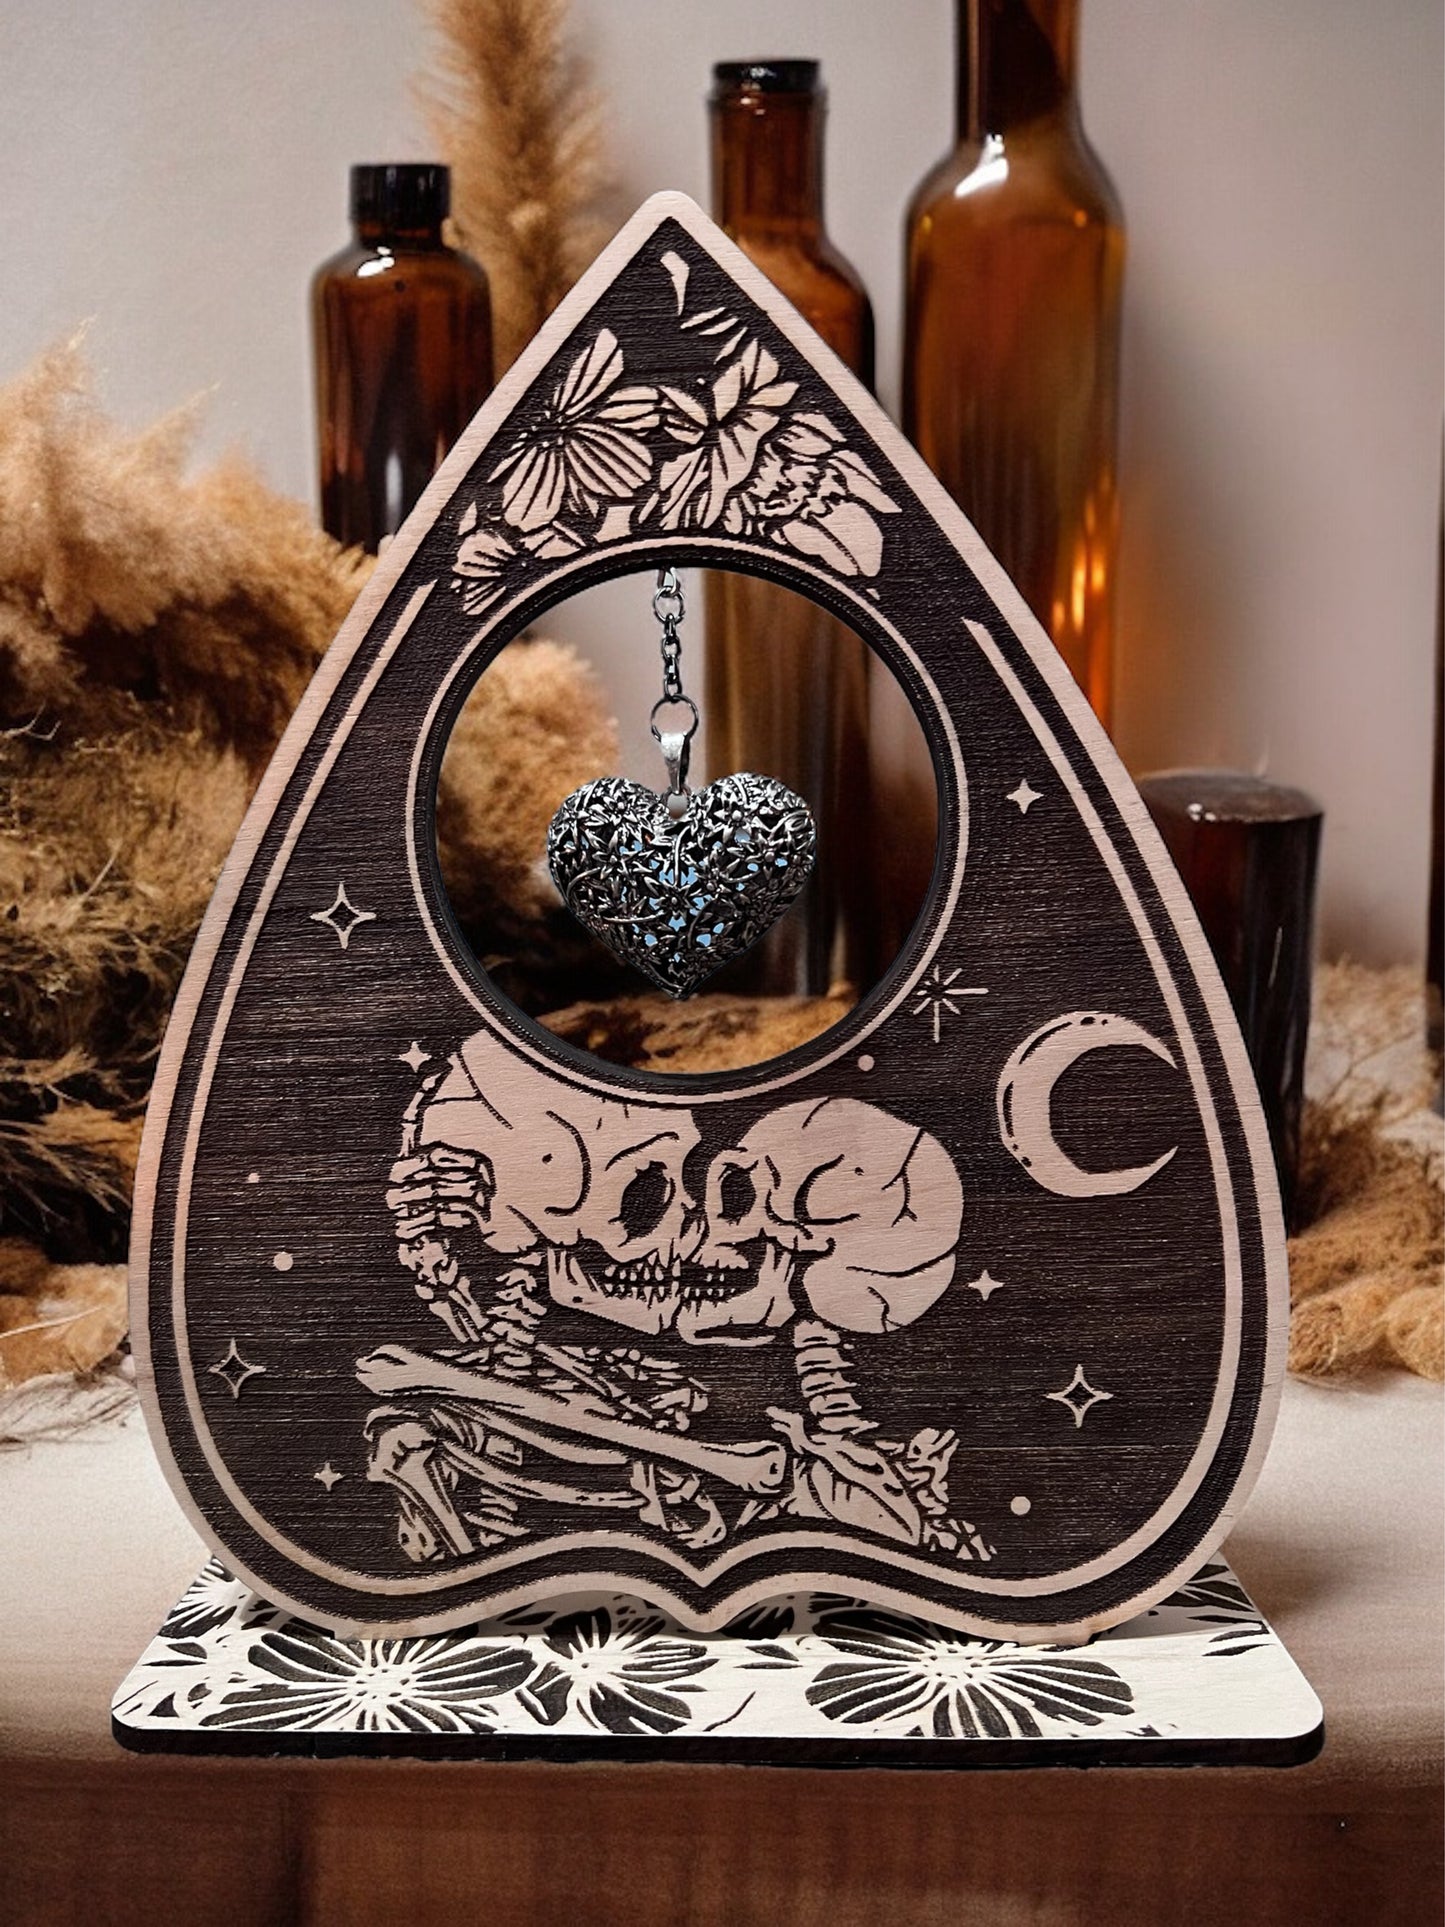 The Lovers Tabletop Planchette